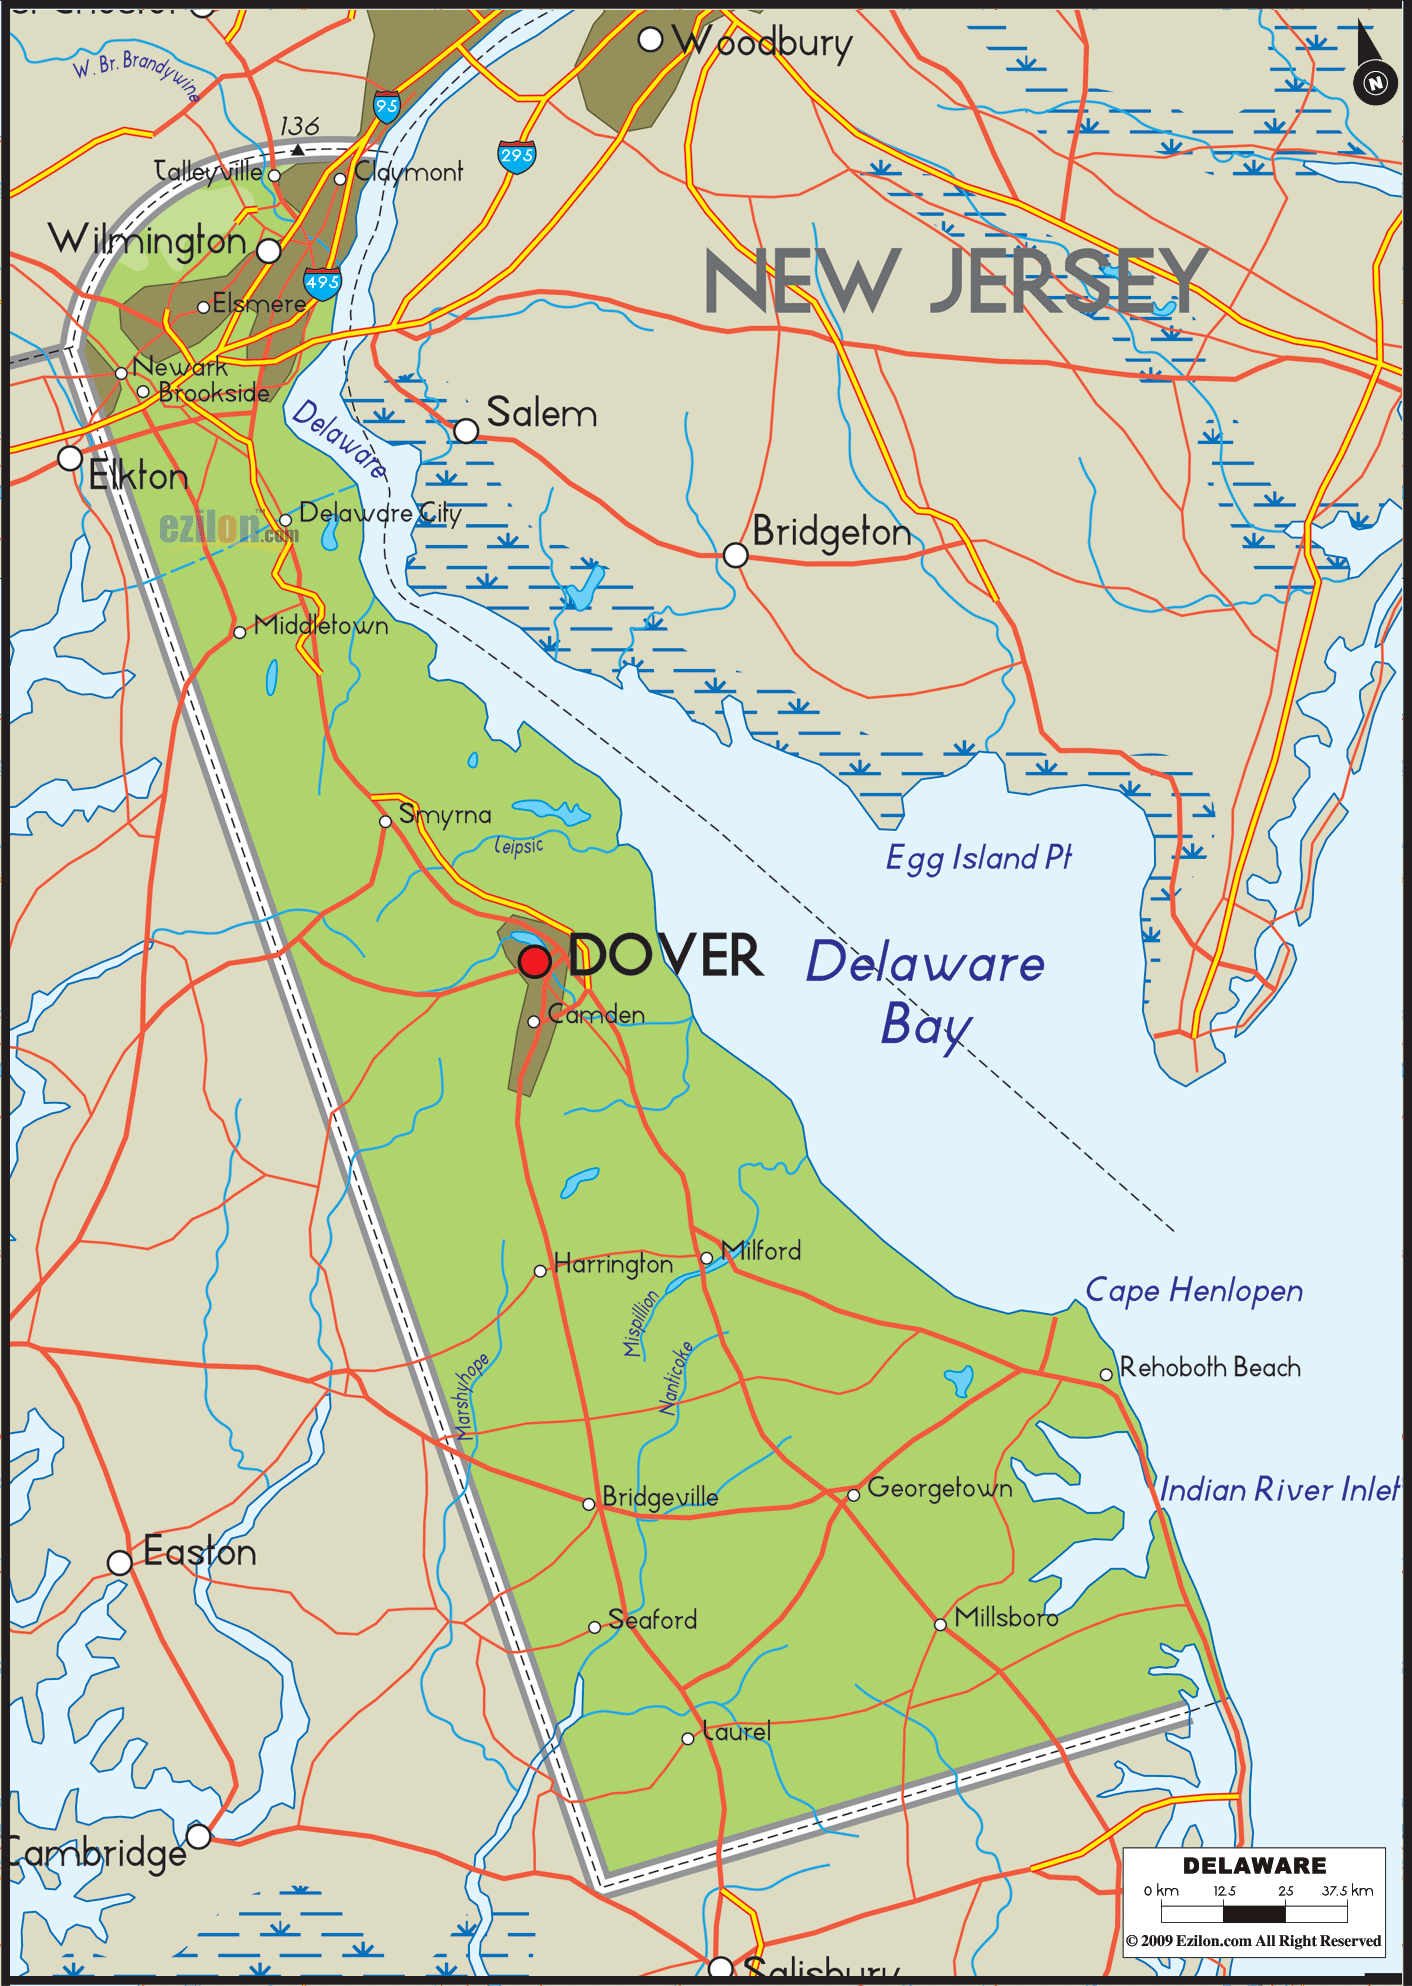 Physical map of Delaware State USA showing major geographical features such as rivers, lakes, topography and land formations.